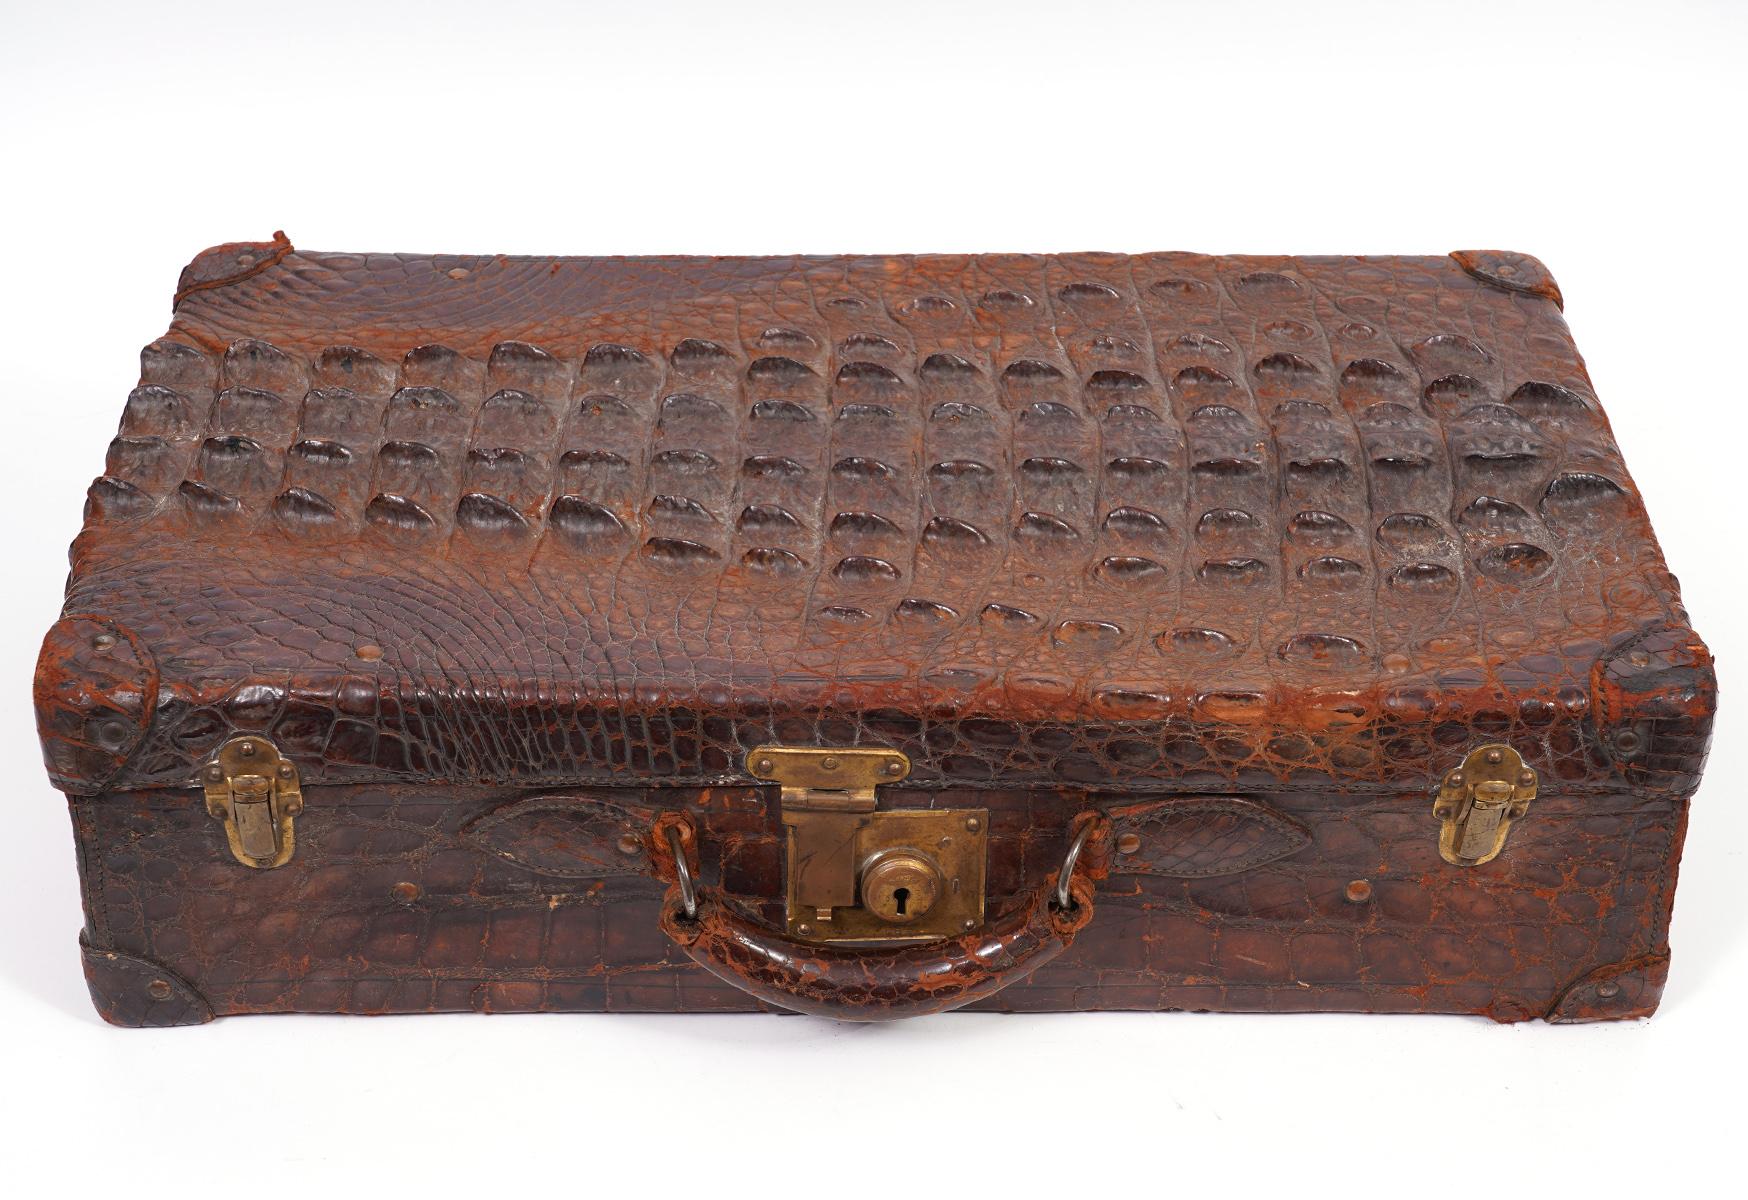 The right term is a small suitcase, measuring 24 x 15 x 7 inches. On the top and the ends it shows the sculptural back skin of the animal lengthwise, on the other sides the more even belly skin. The front is mounted with brass lock and handle